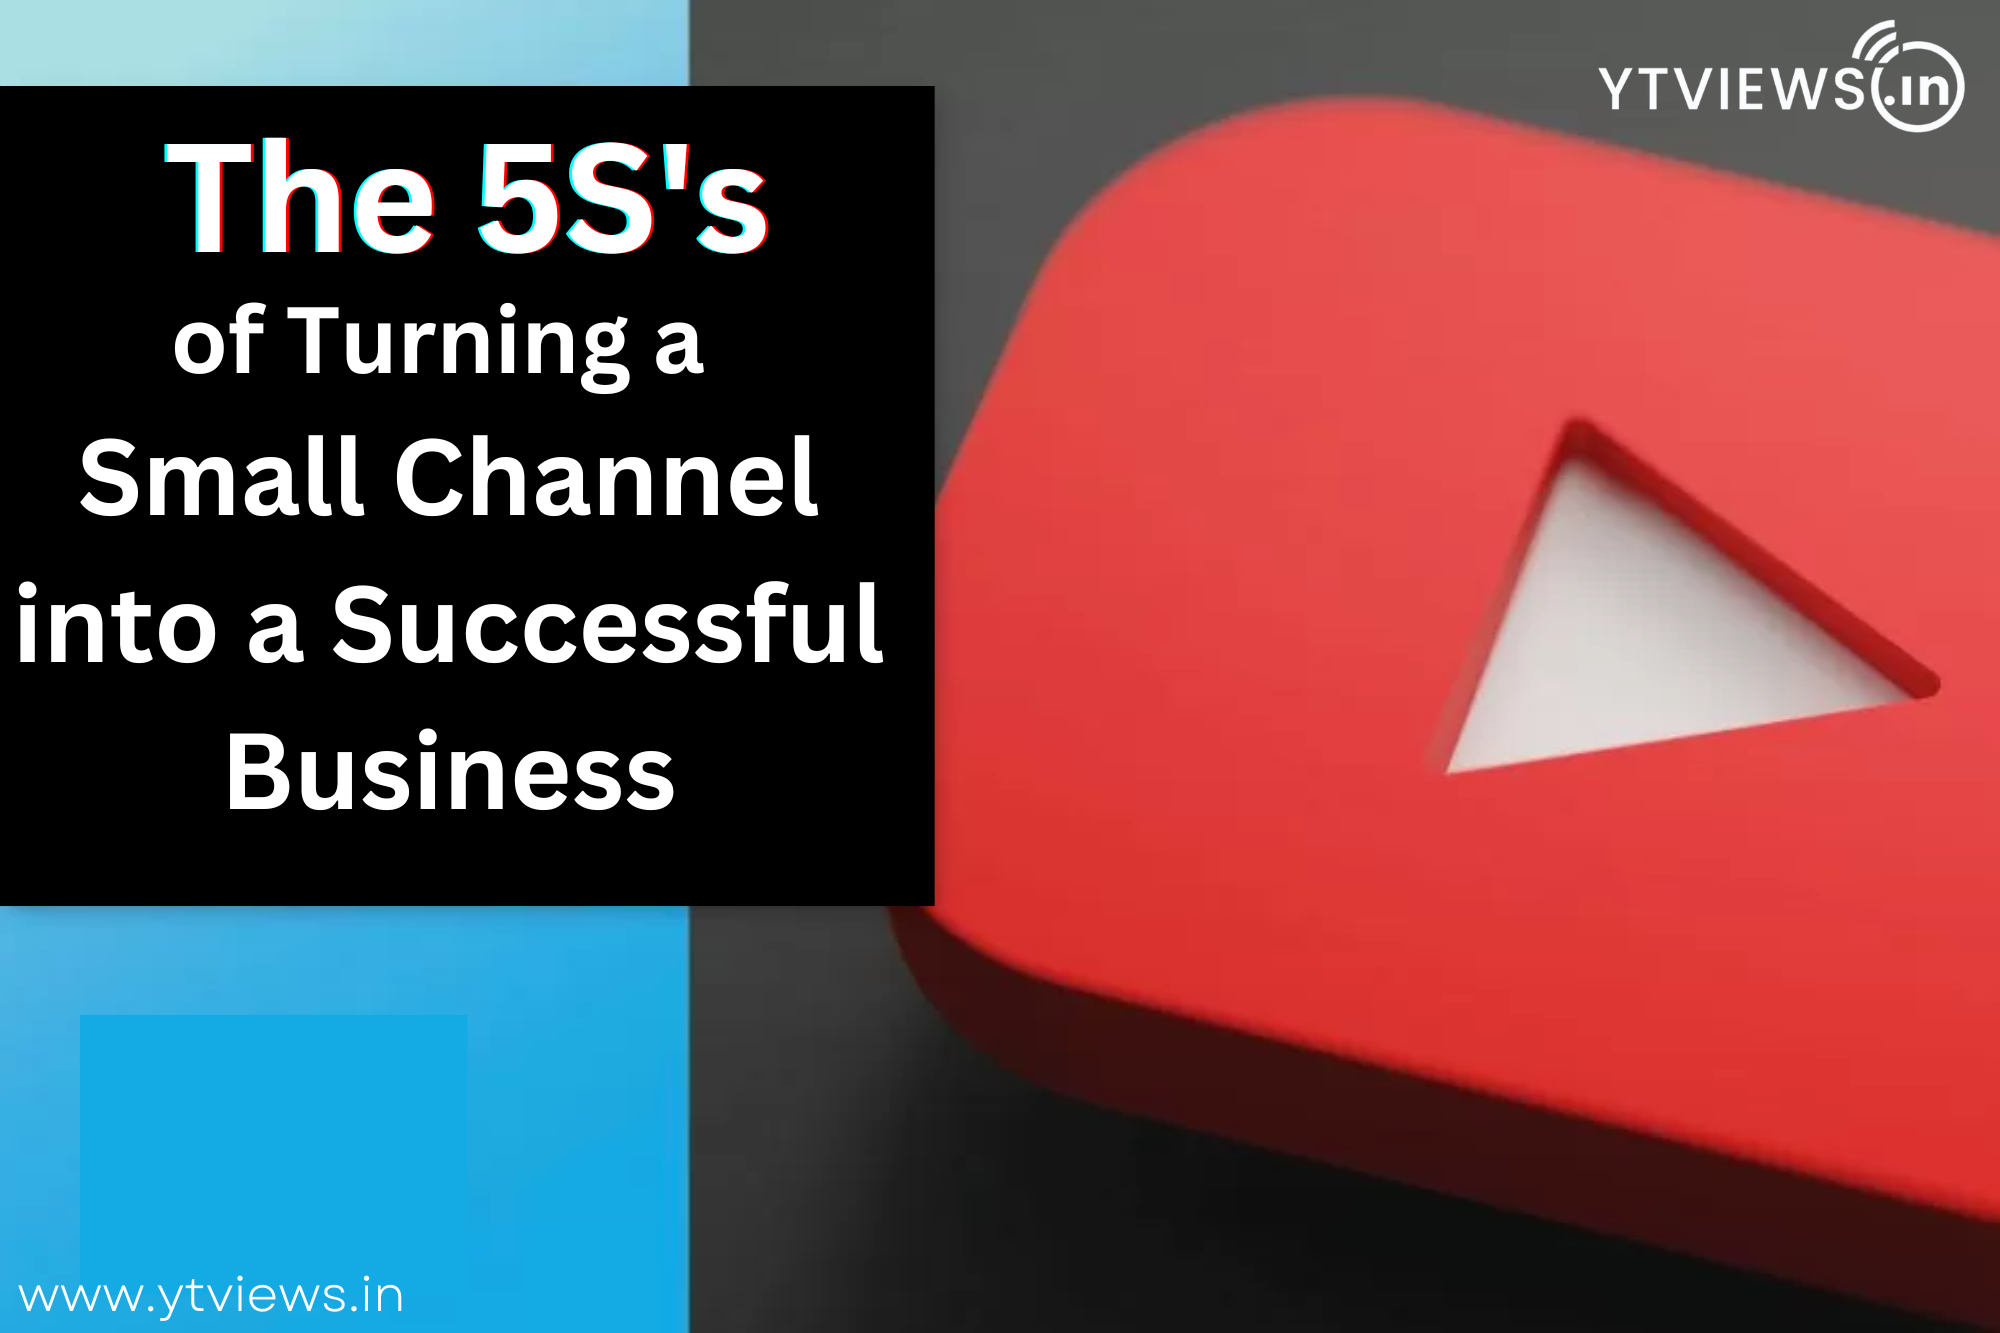 The 5 S’s Of Turning A Small Channel Into A Successful Business